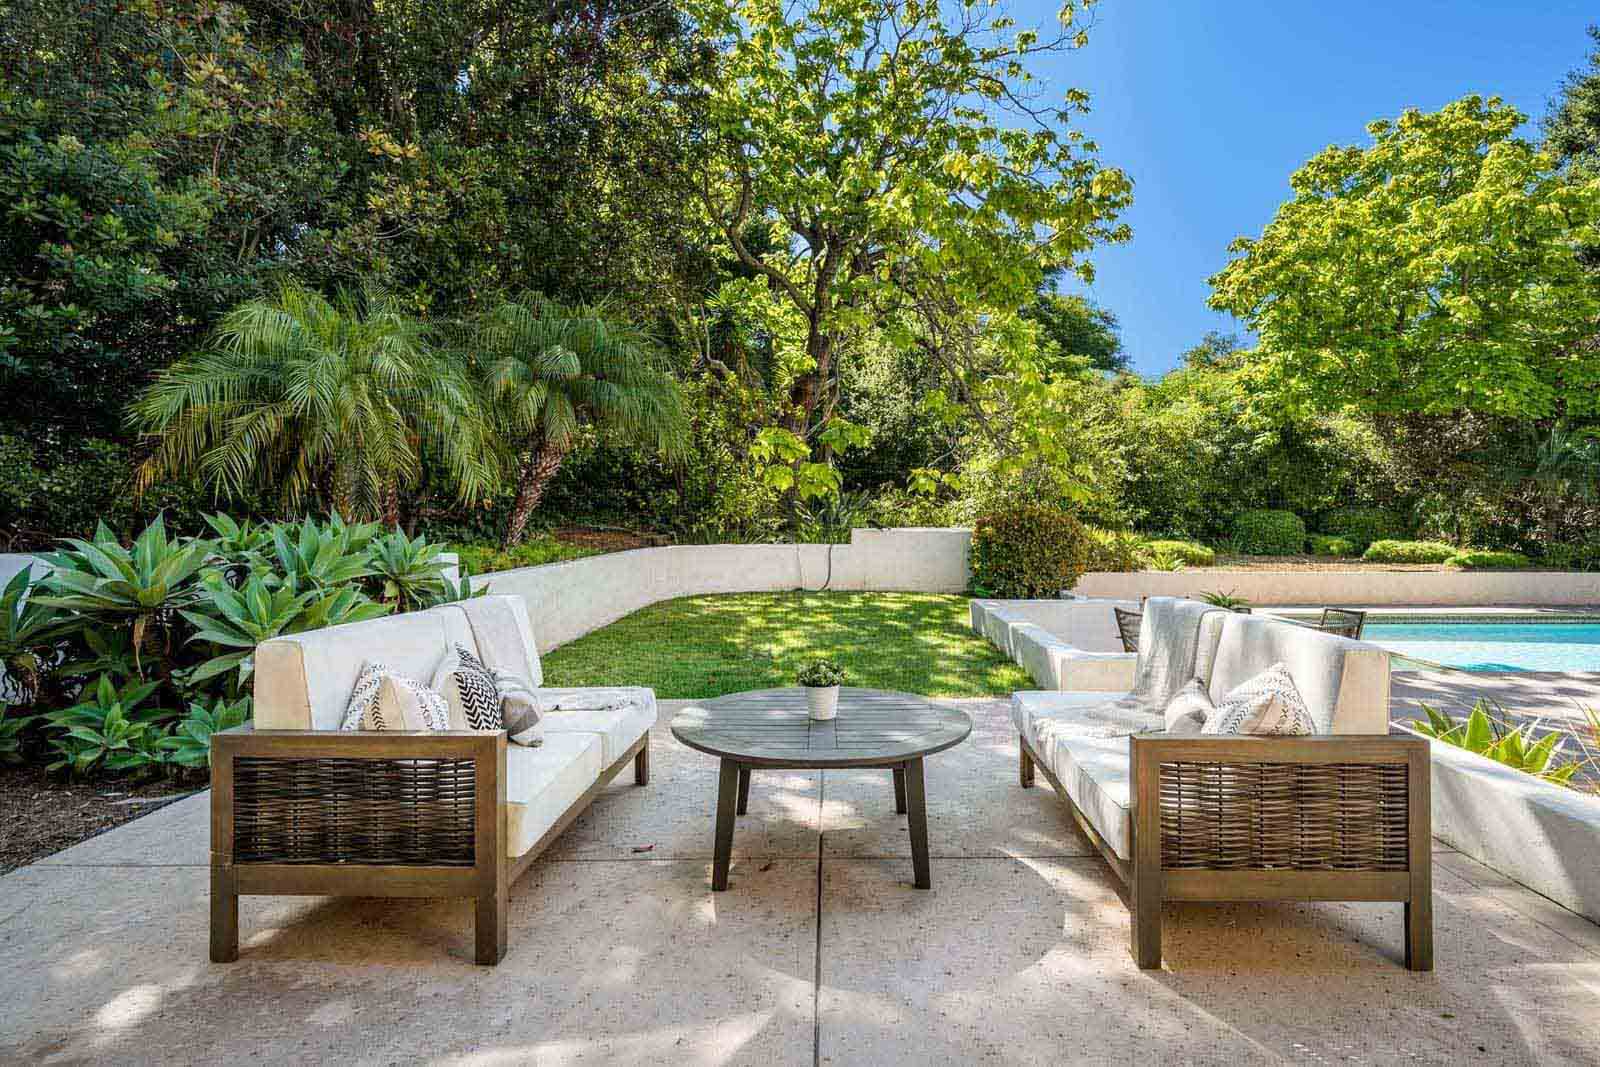 Retreat to a landscaped garden oasis